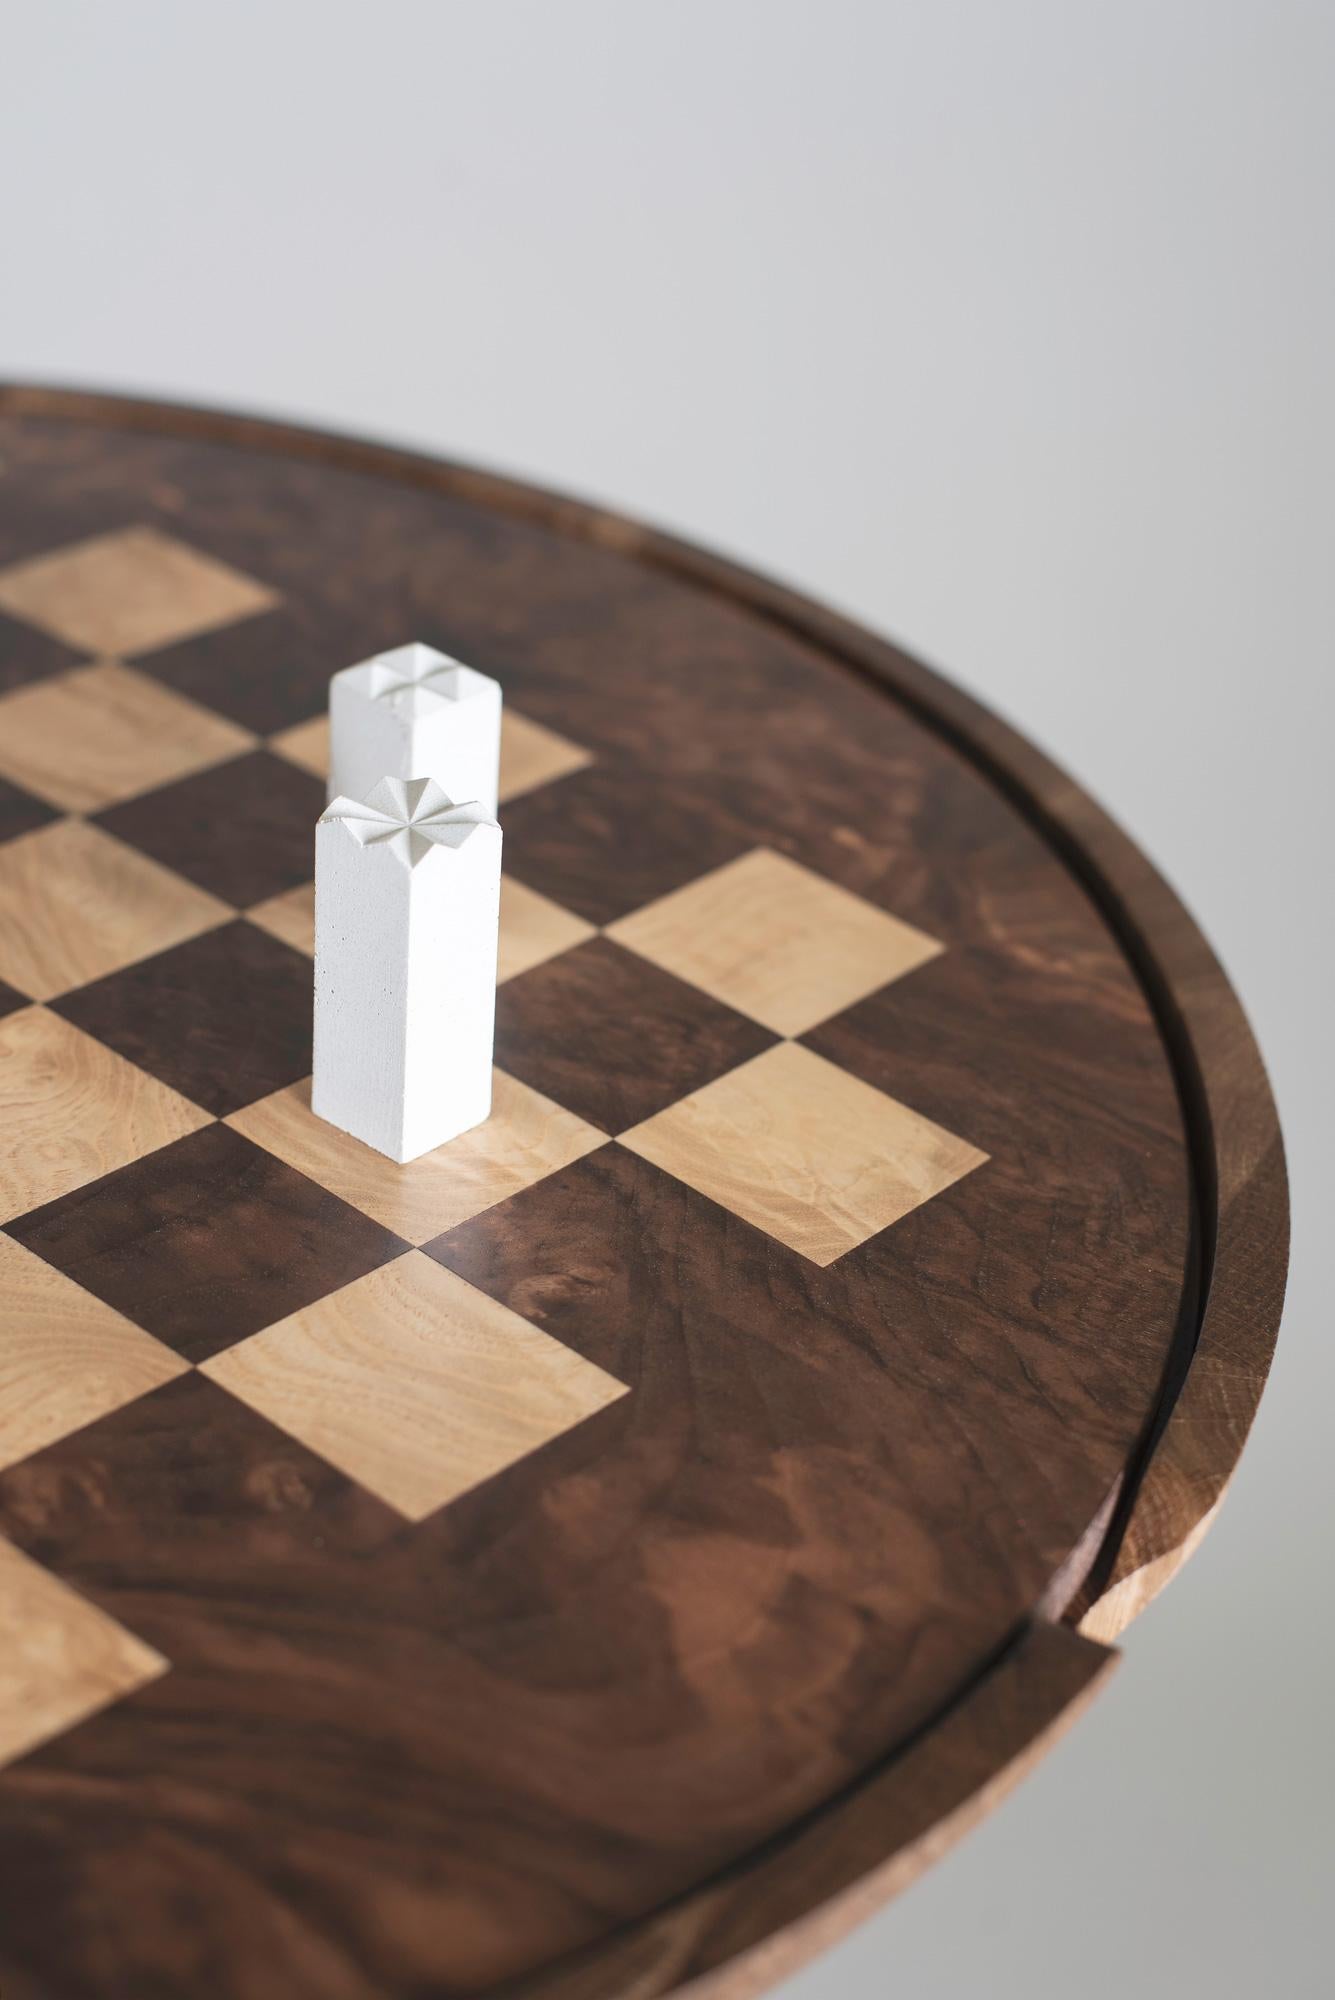 chess table and chairs